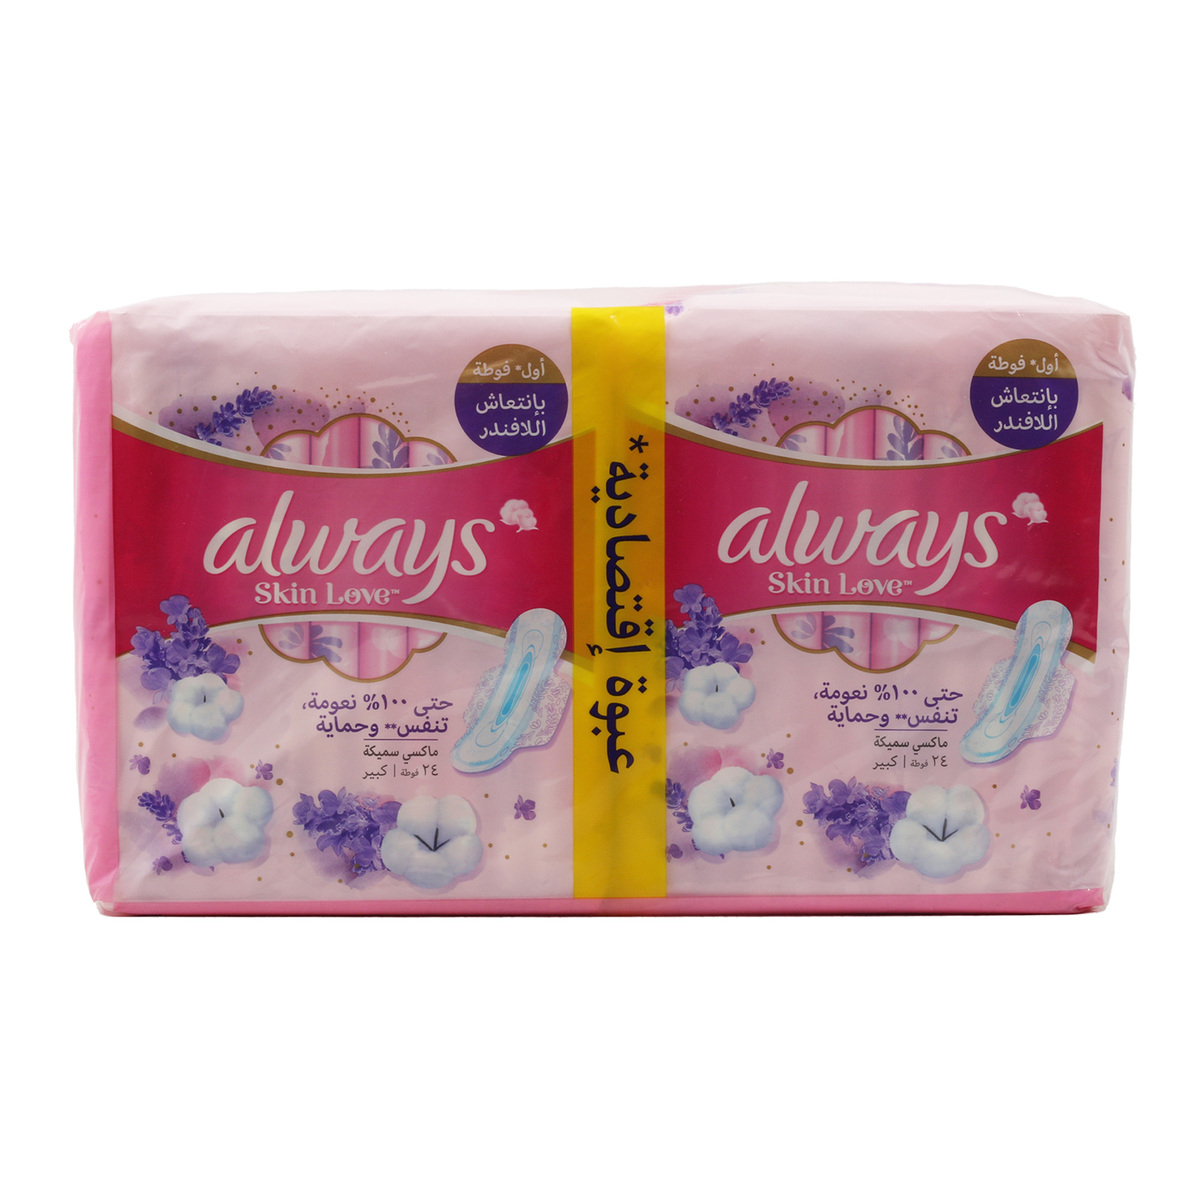 Always Napkin Total Protection With Wings Large Value Pack 48pcs